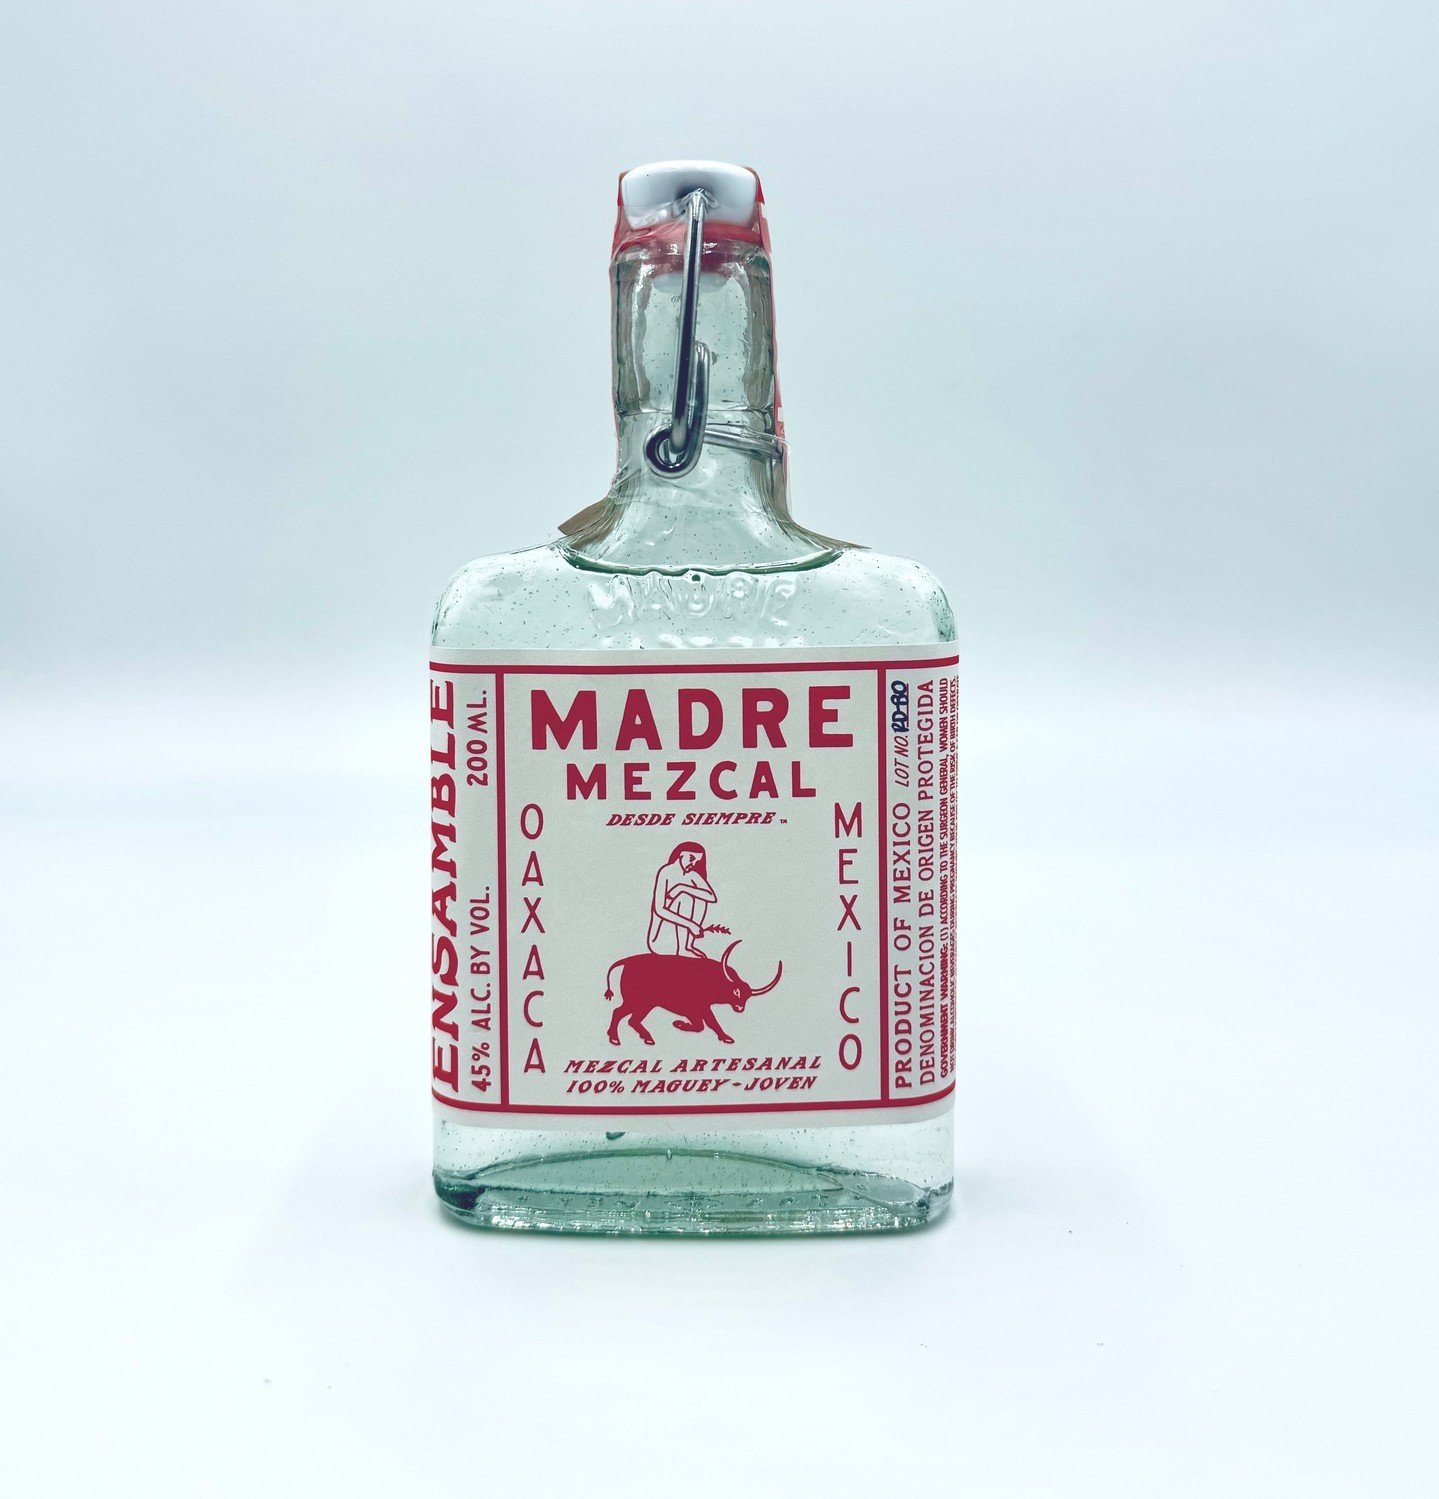 A blend of Espadin + Cuishe, perfectly balanced for everyday sipping. Fantastic for a Mezcal intro and an equally exciting option for the aficionados❗️

Madre Ensamble Cuishe/Espadin Mezcal Oaxaca, Mexico NV 200ml 

Hotels, retail, events, mezcal, en